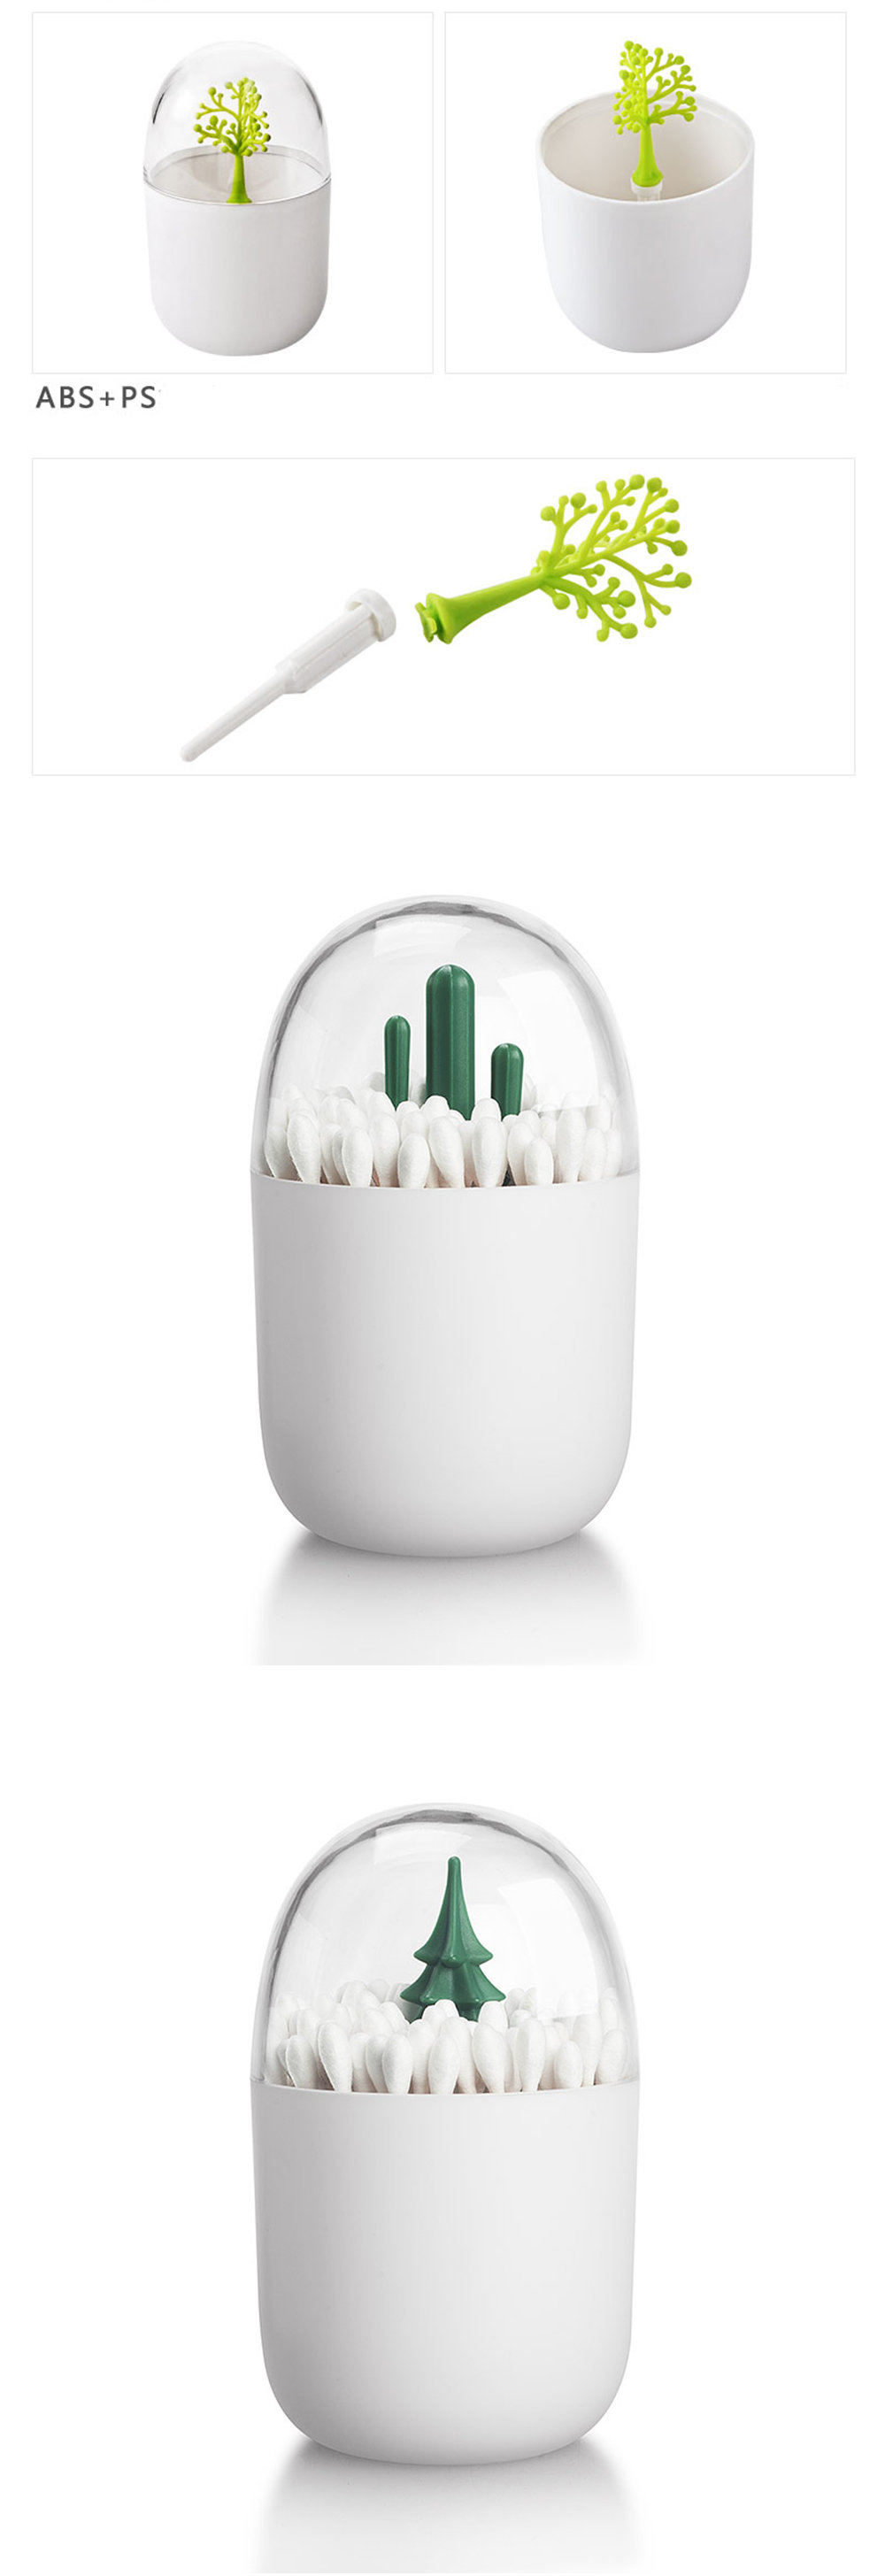 CHAOSON Home Travel Dust-proof Portable Organizer Q-tip Holder Swab  Canisters Toothpick Container Cotton Balls Dispenser Box